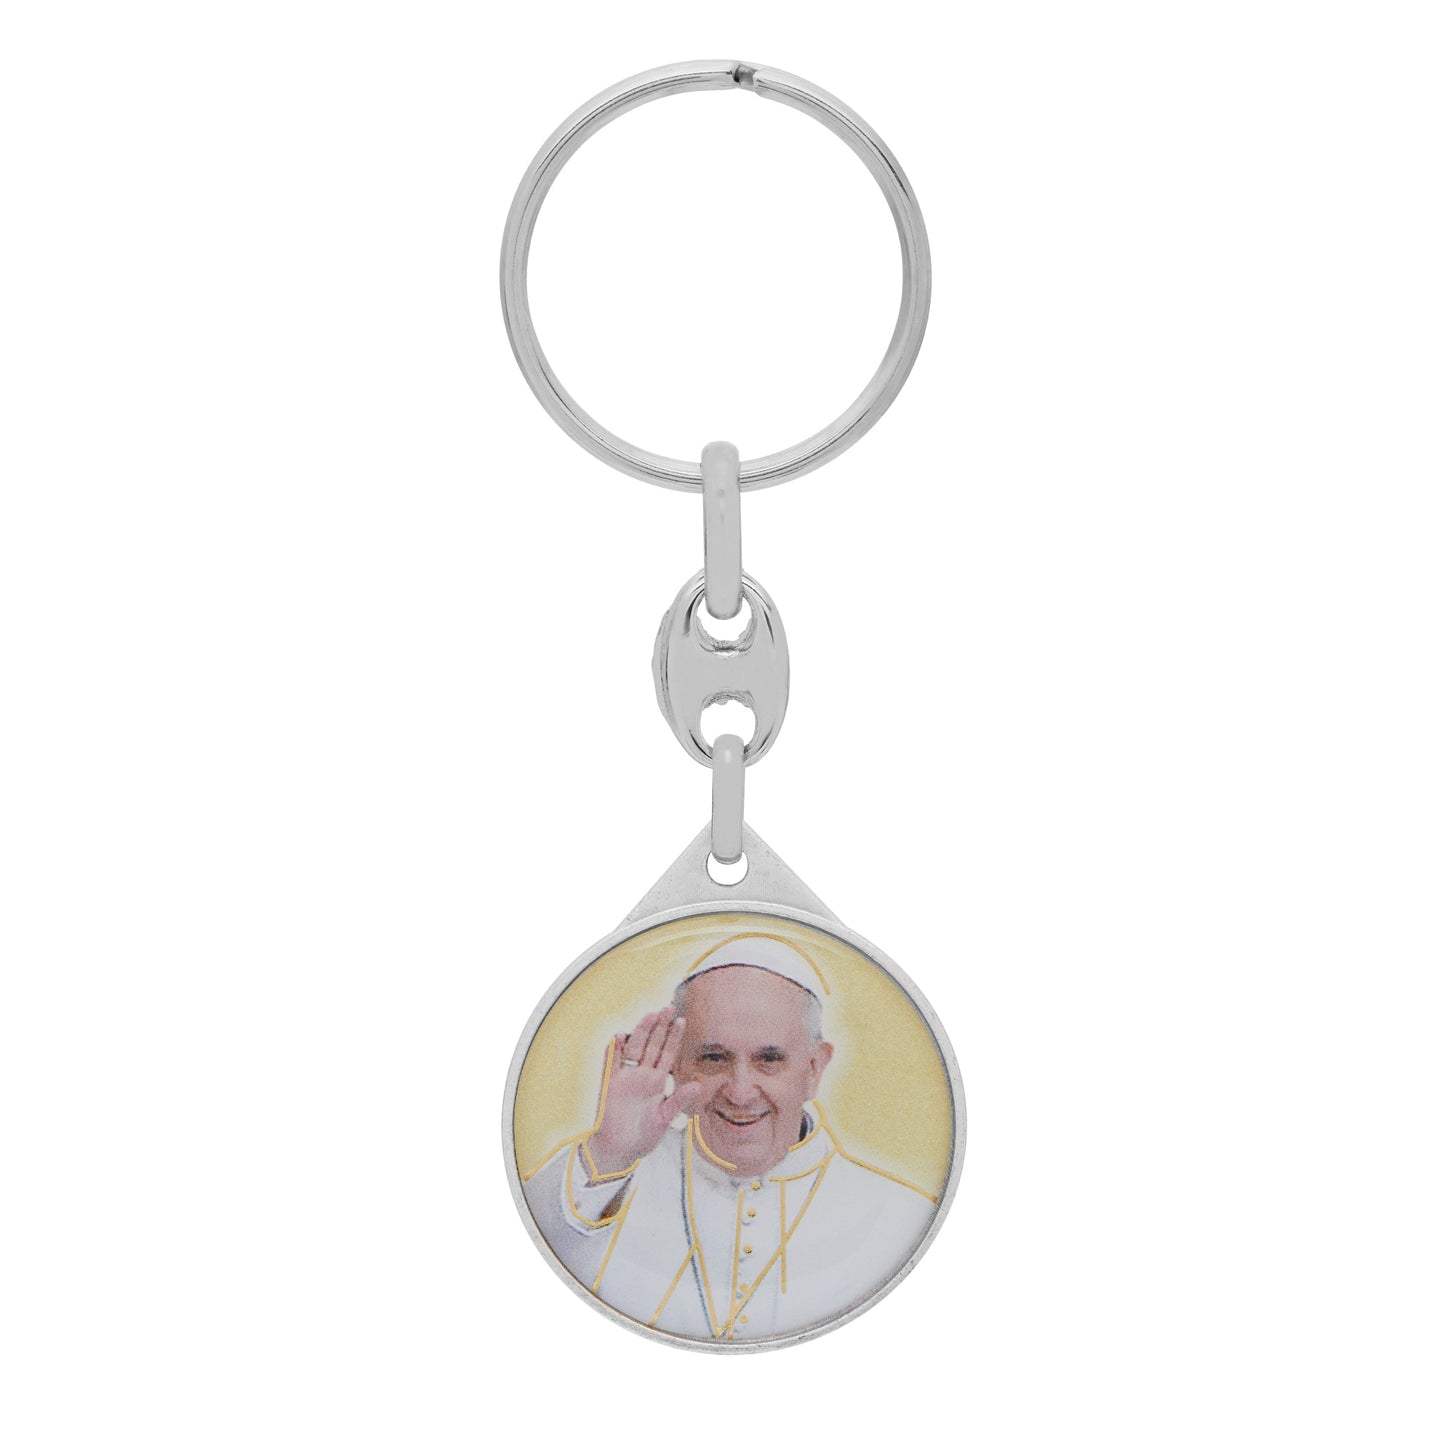 Mondo Cattolico Keychains Round Colored Metal Keychain of Pope Francis With Yellow Background